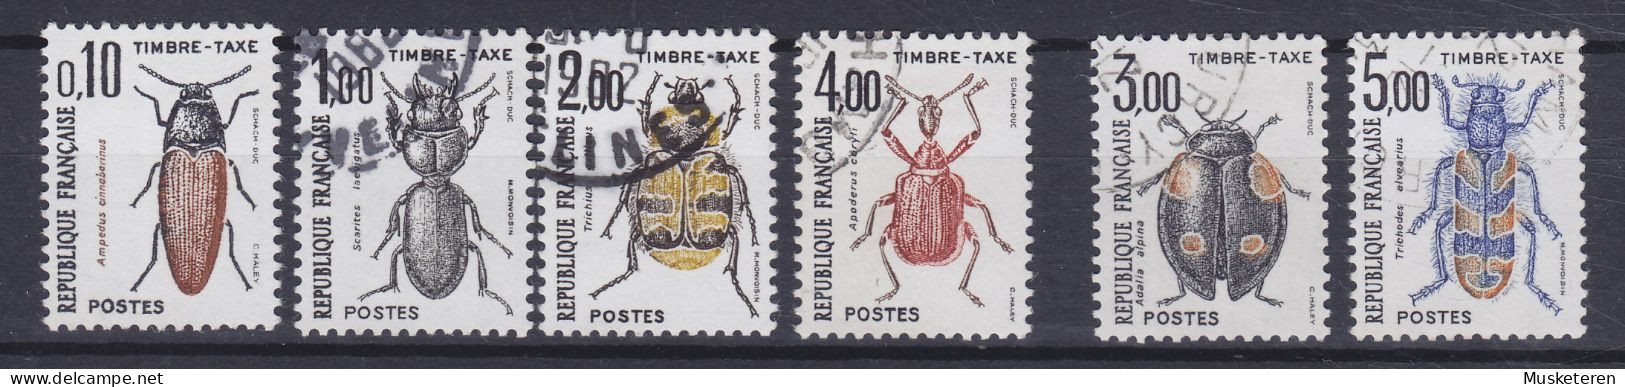 France Taxe Postage Due 1982/83 Mi. 106, 109-11, 114-15 Käfer Beetles Insekten Insects (o) - 1960-.... Afgestempeld